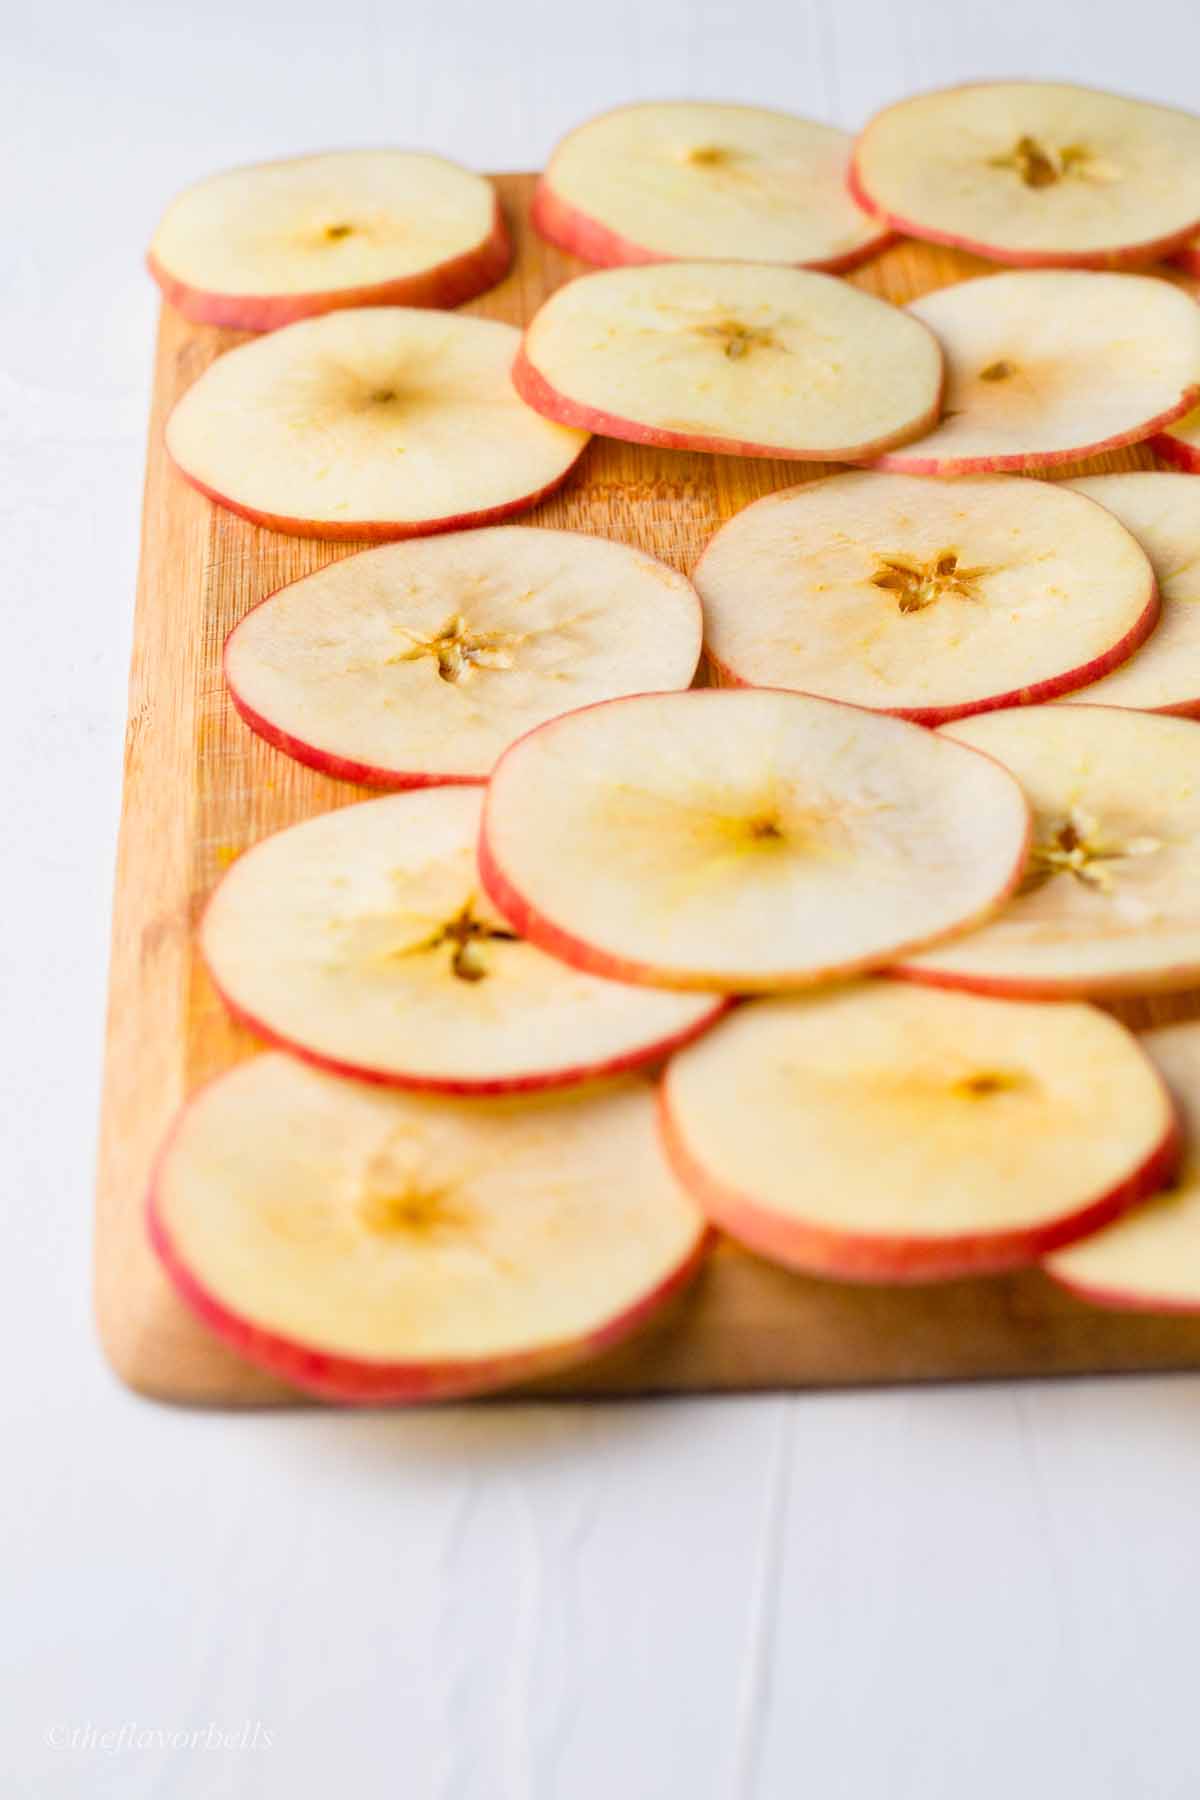 thin slices of apples on a wooden board